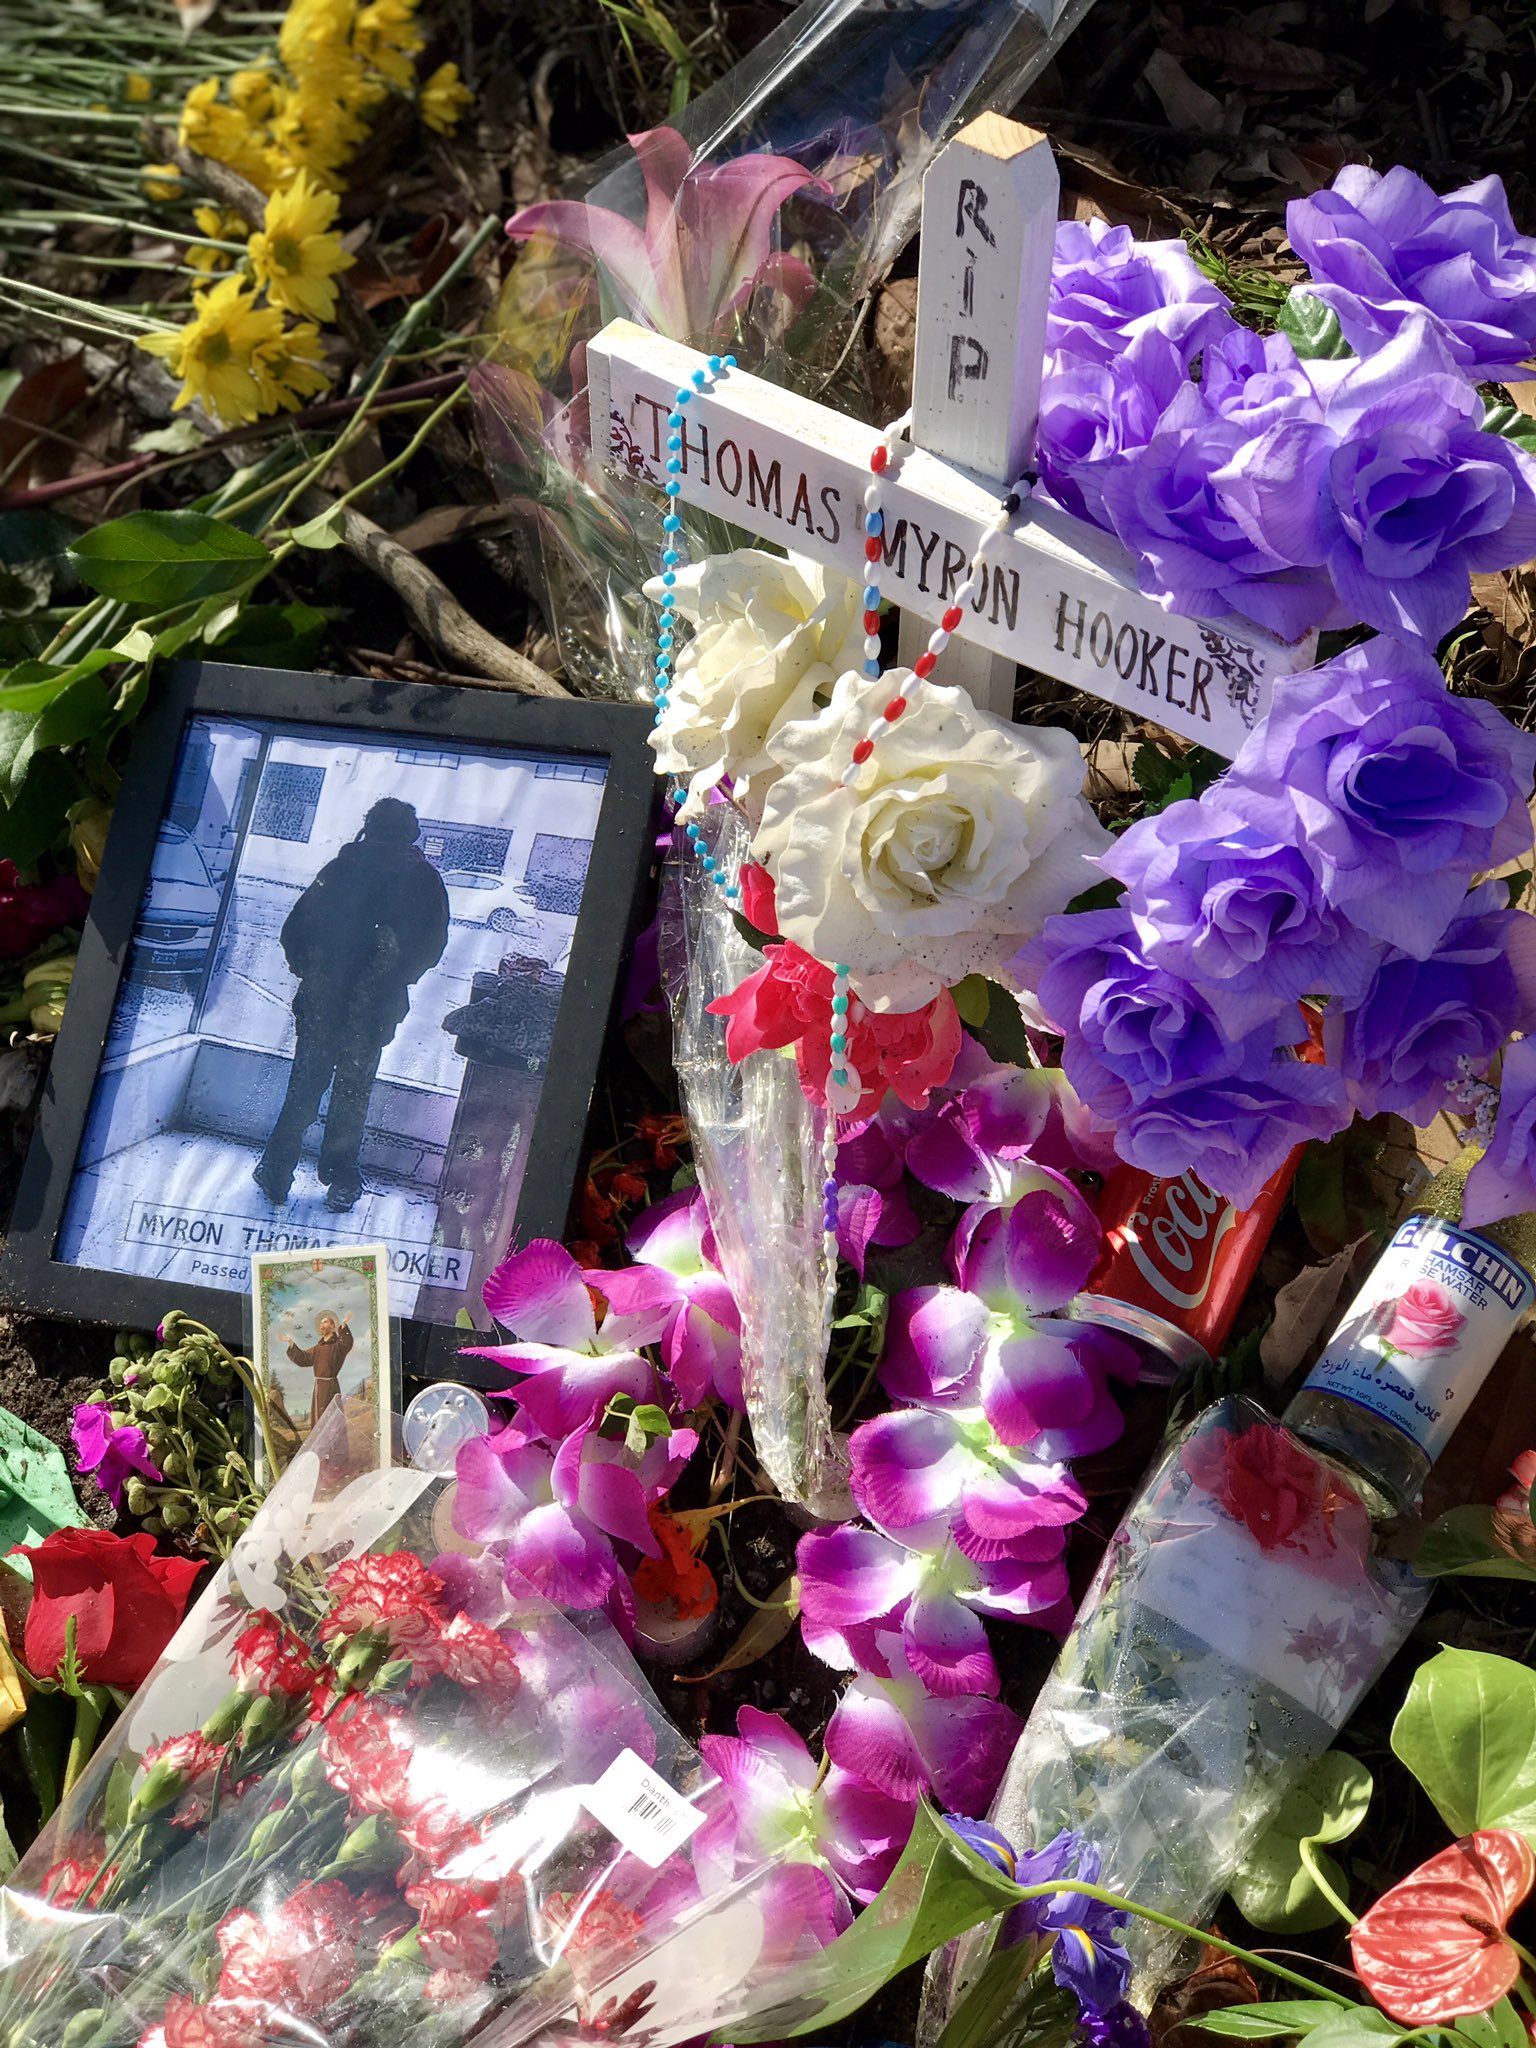 A memorial for Thomas at the corner of Funston and Clement. Photo by @SG